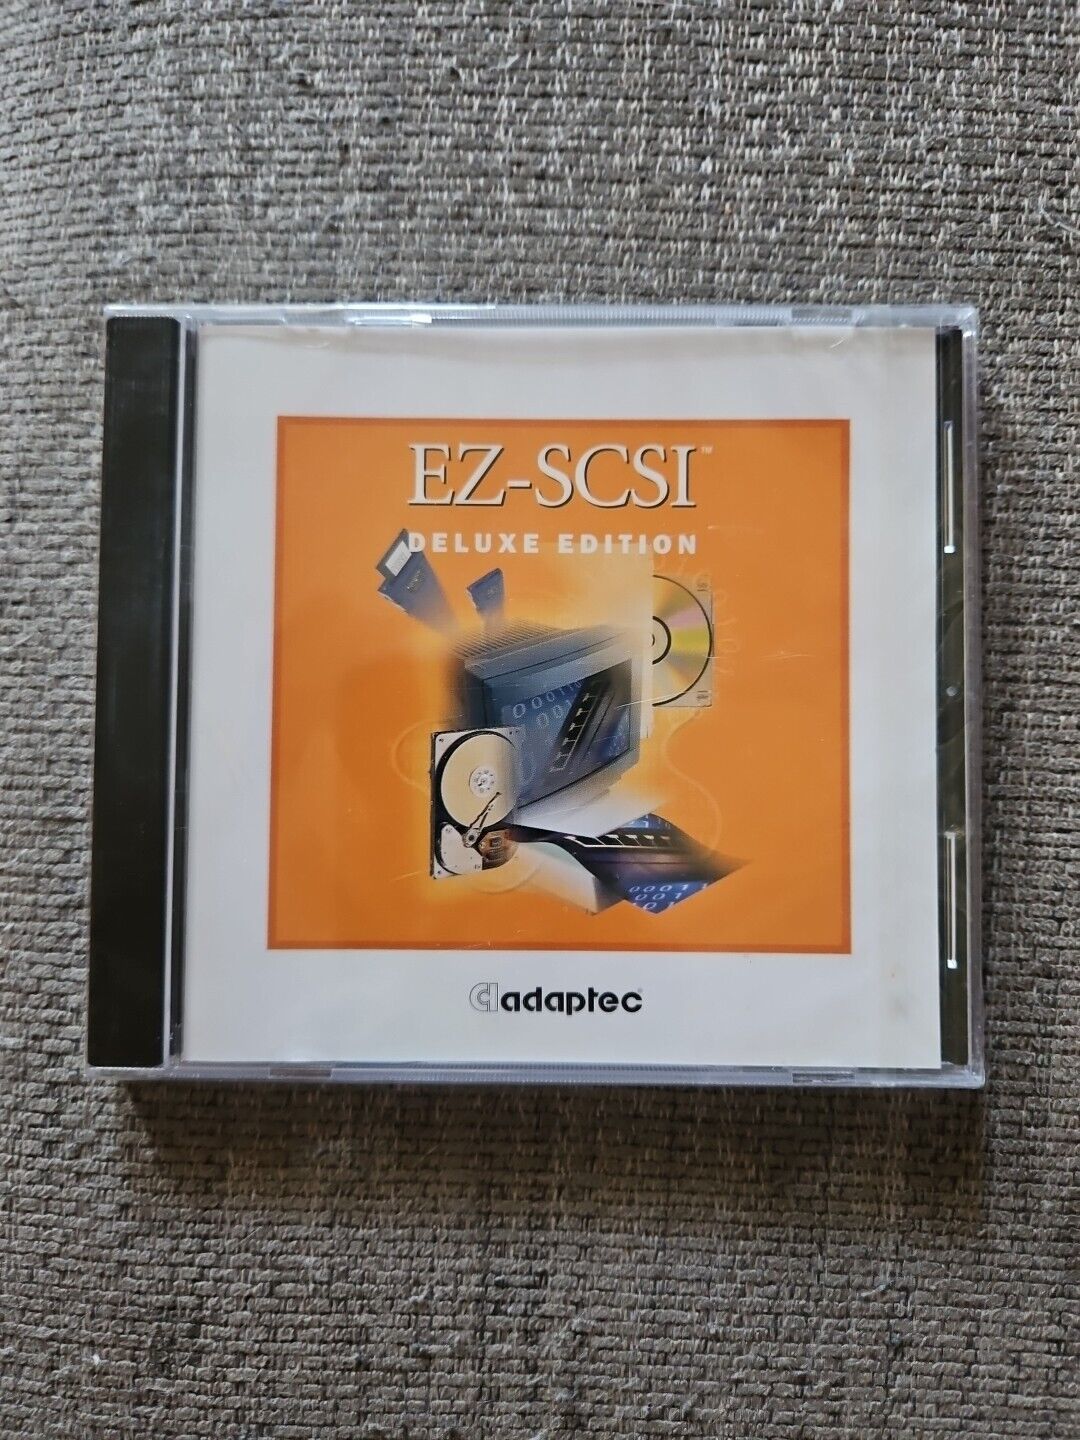 Brand New & Sealed Adaptec EZ-SCSI Deluxe Edition Rev A Ver 5.0 (1998) 